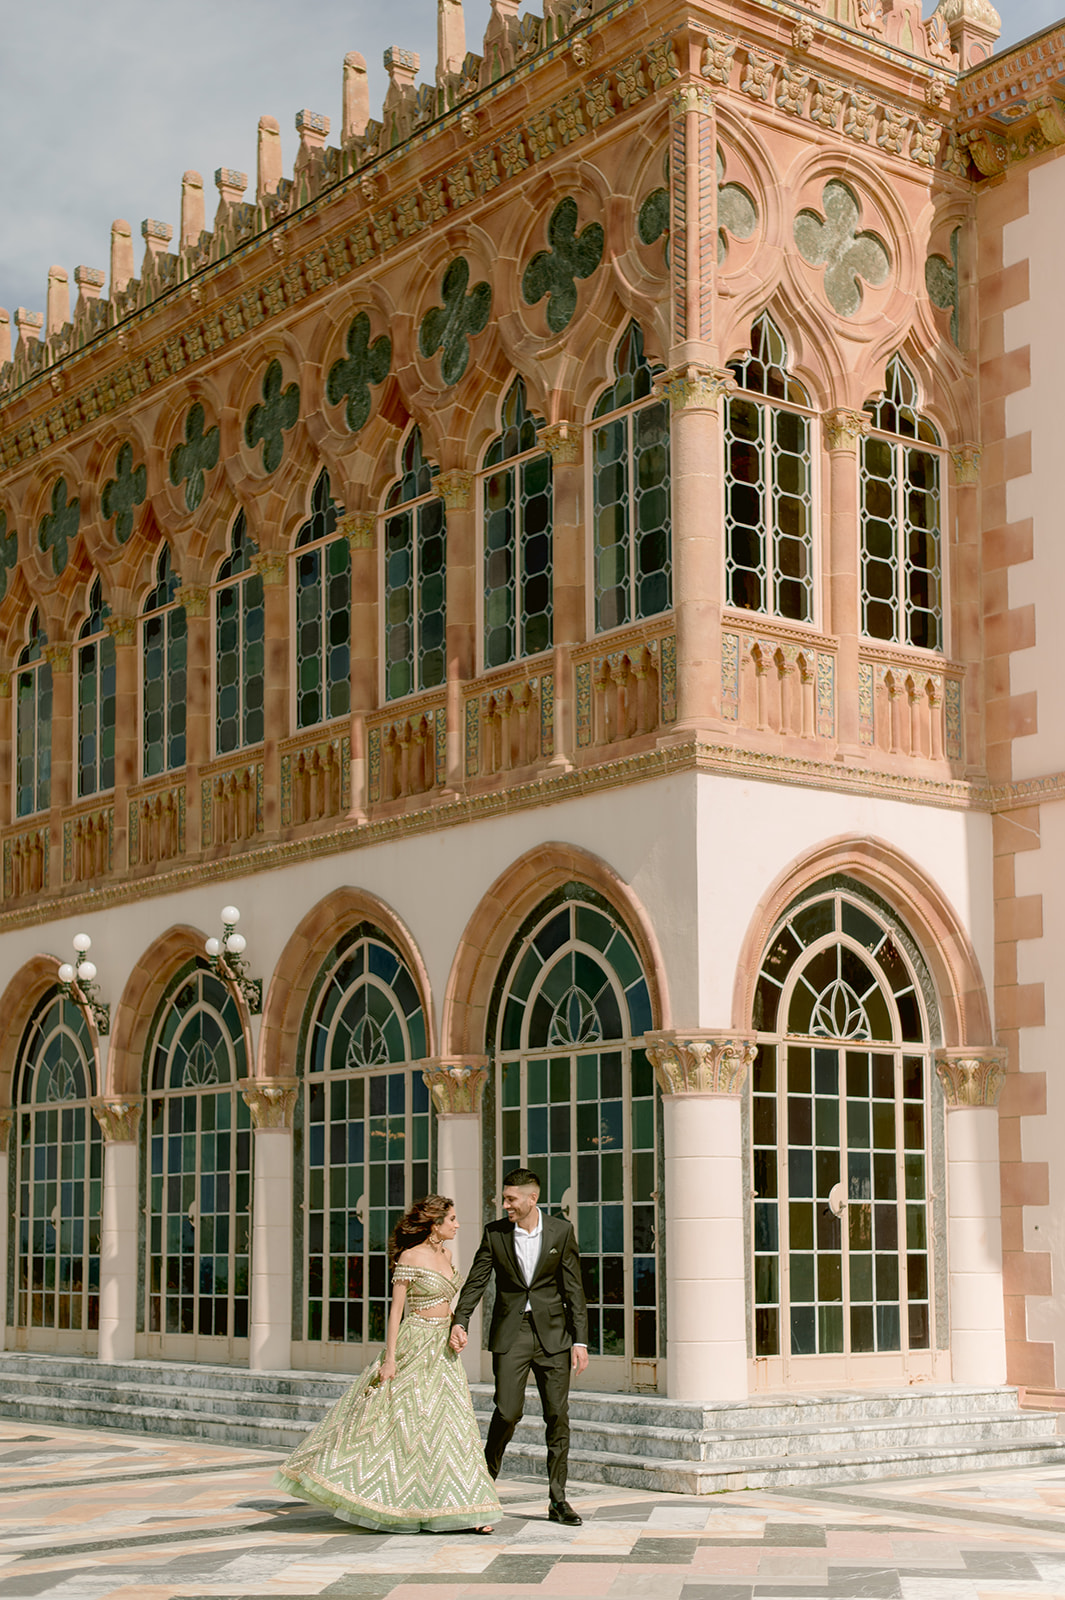 "Indian bride and groom in traditional attire showcase their love and beauty at the Ringling Museum's Ca' d'Zan mansion"